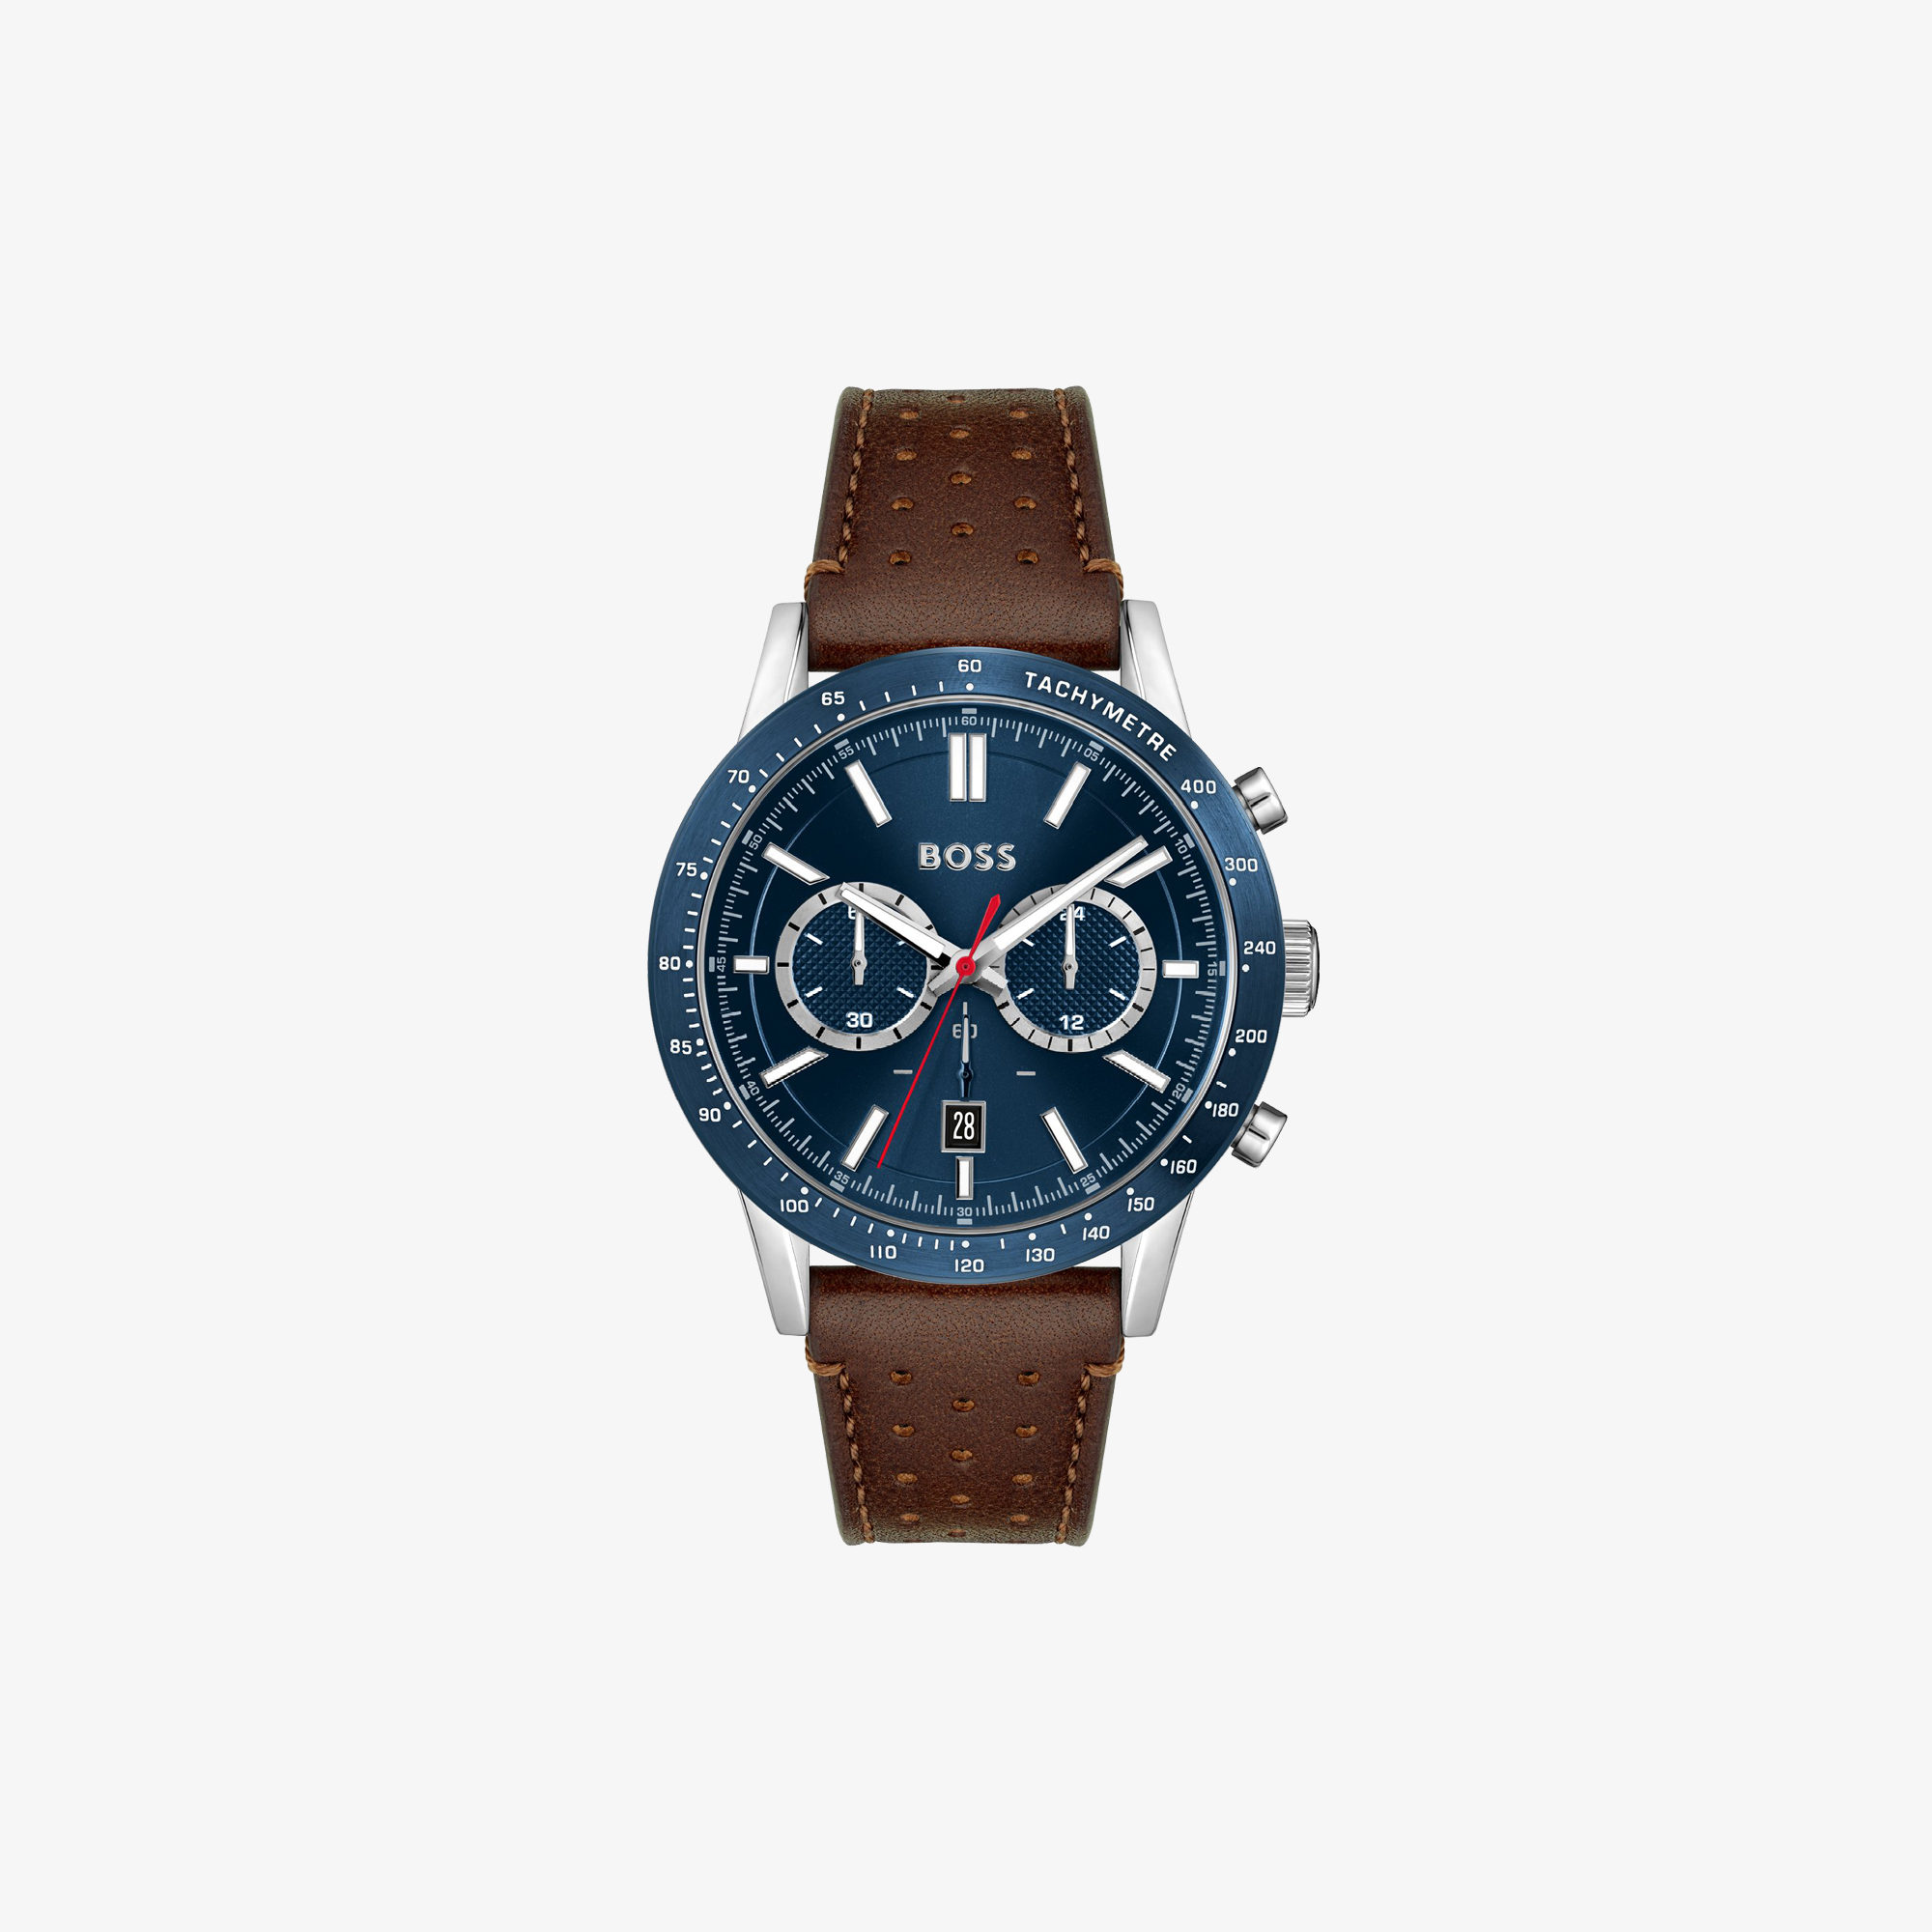 HUGO BOSS ALLURE CHRONOGRAPH WITH BLUE DIAL AND BROWN LEATHER STRAP